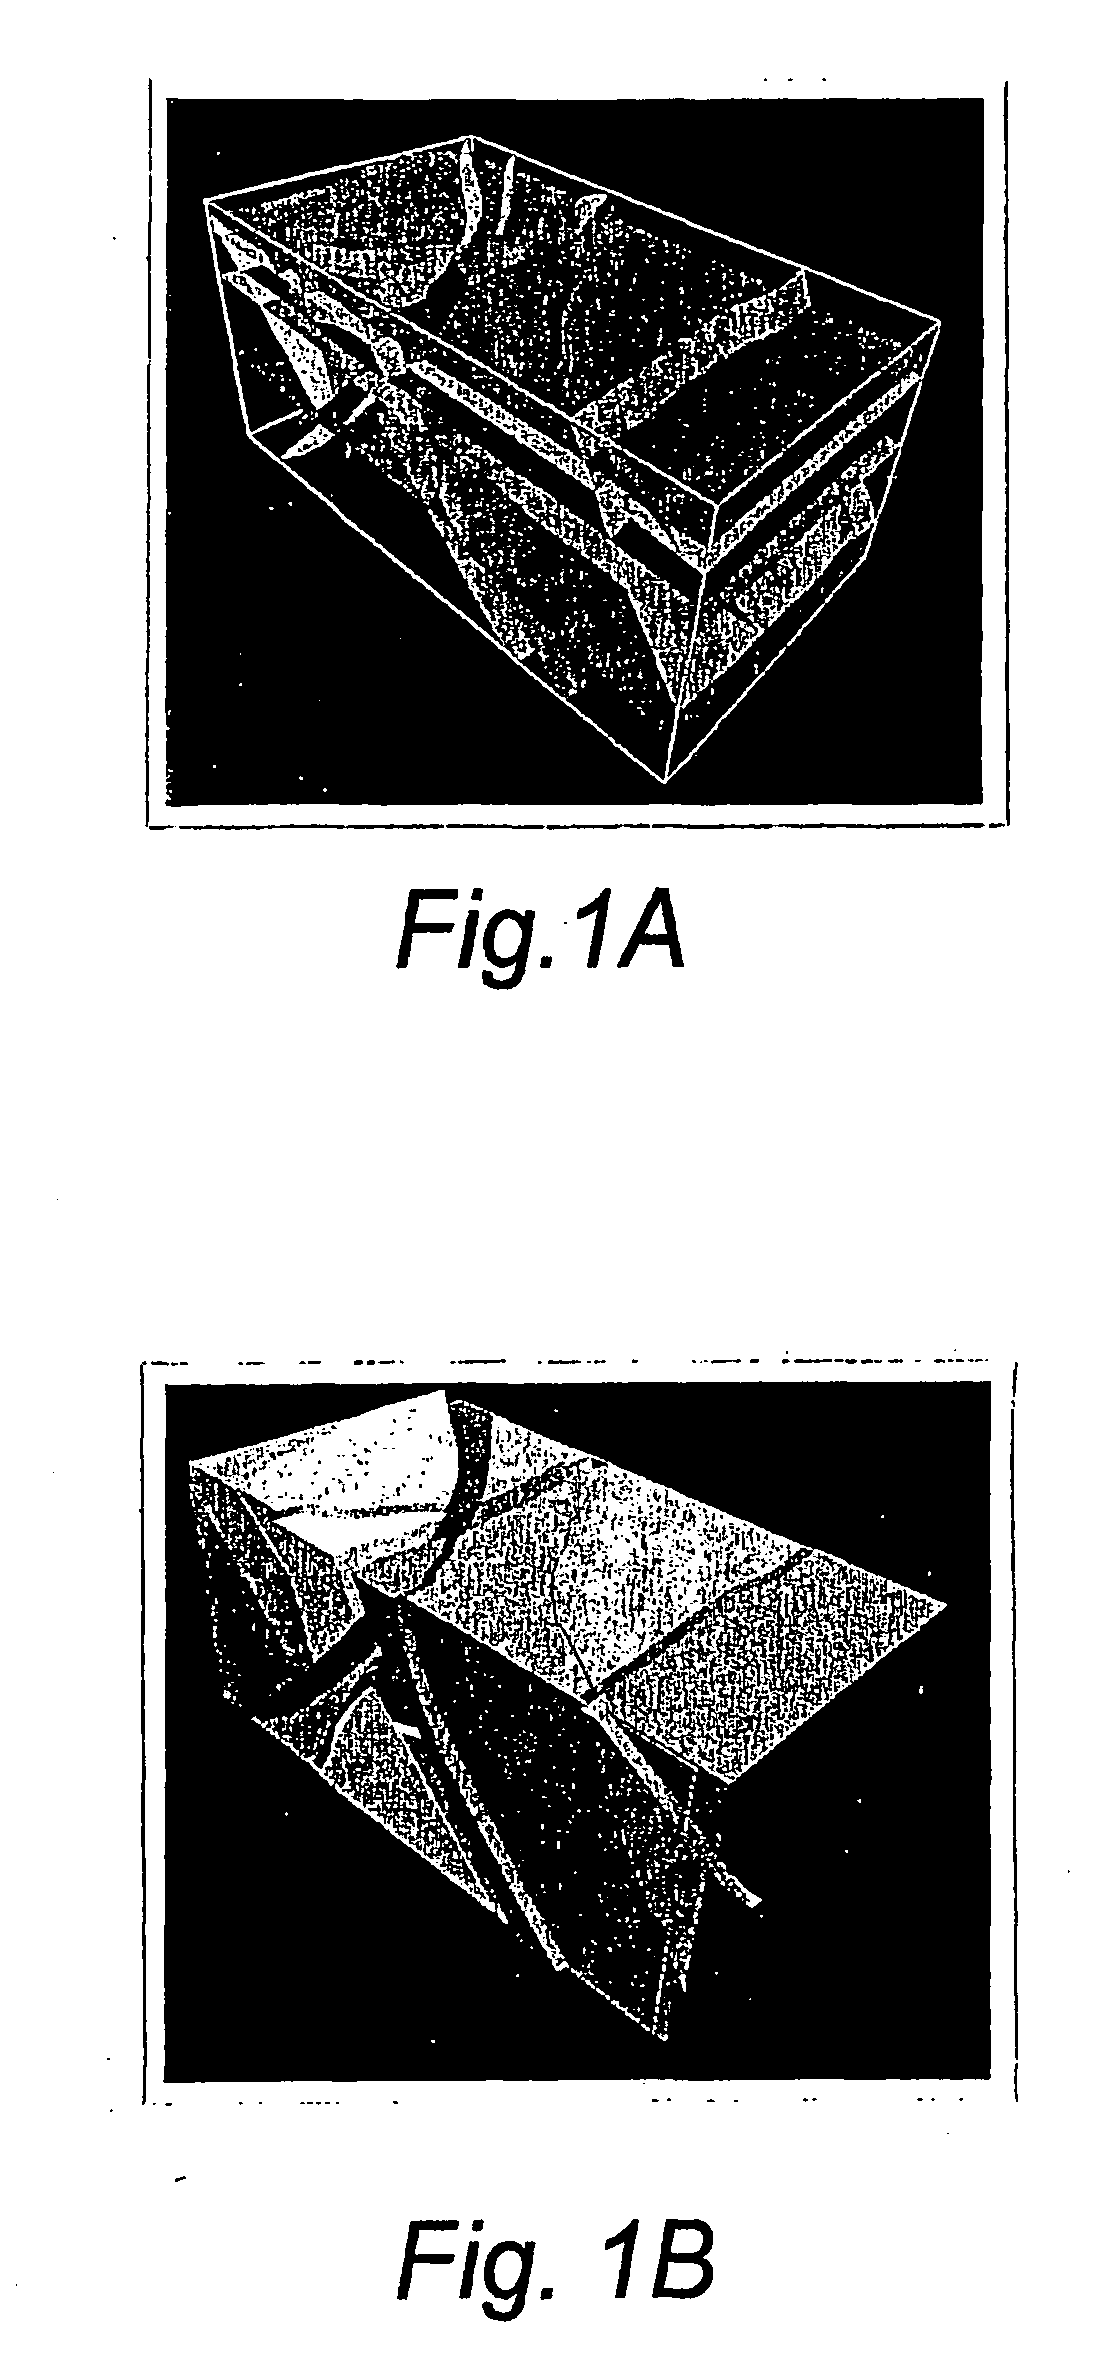 Method for representing a volume of earth using modelling environment